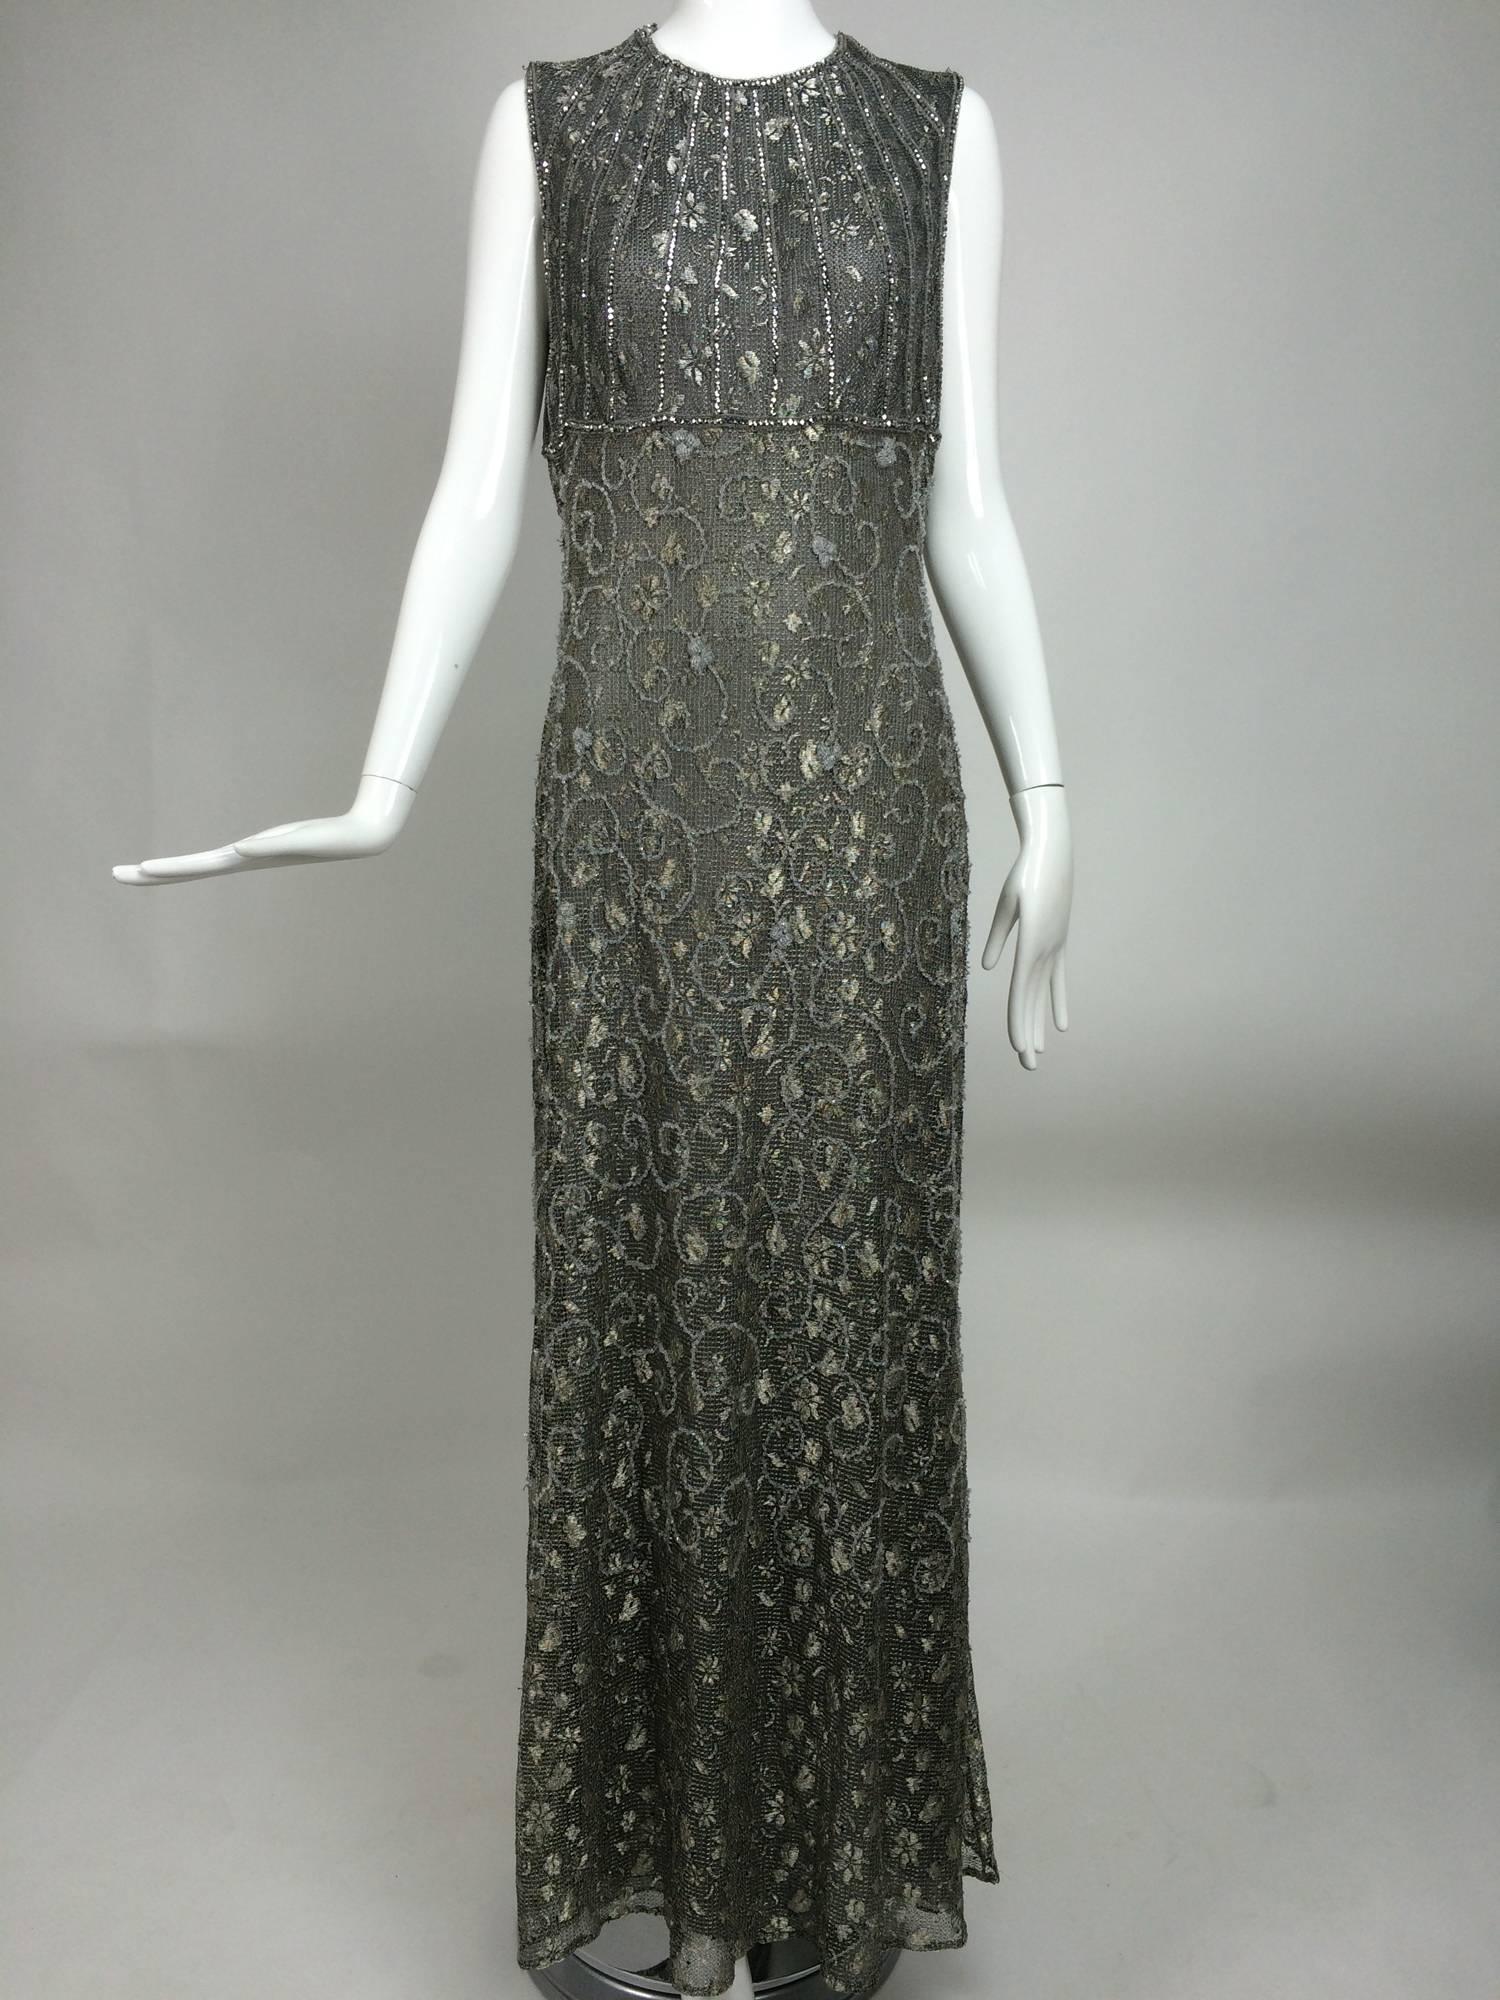 Badgley Mischka embroidered & beaded silver metallic lace gown 4